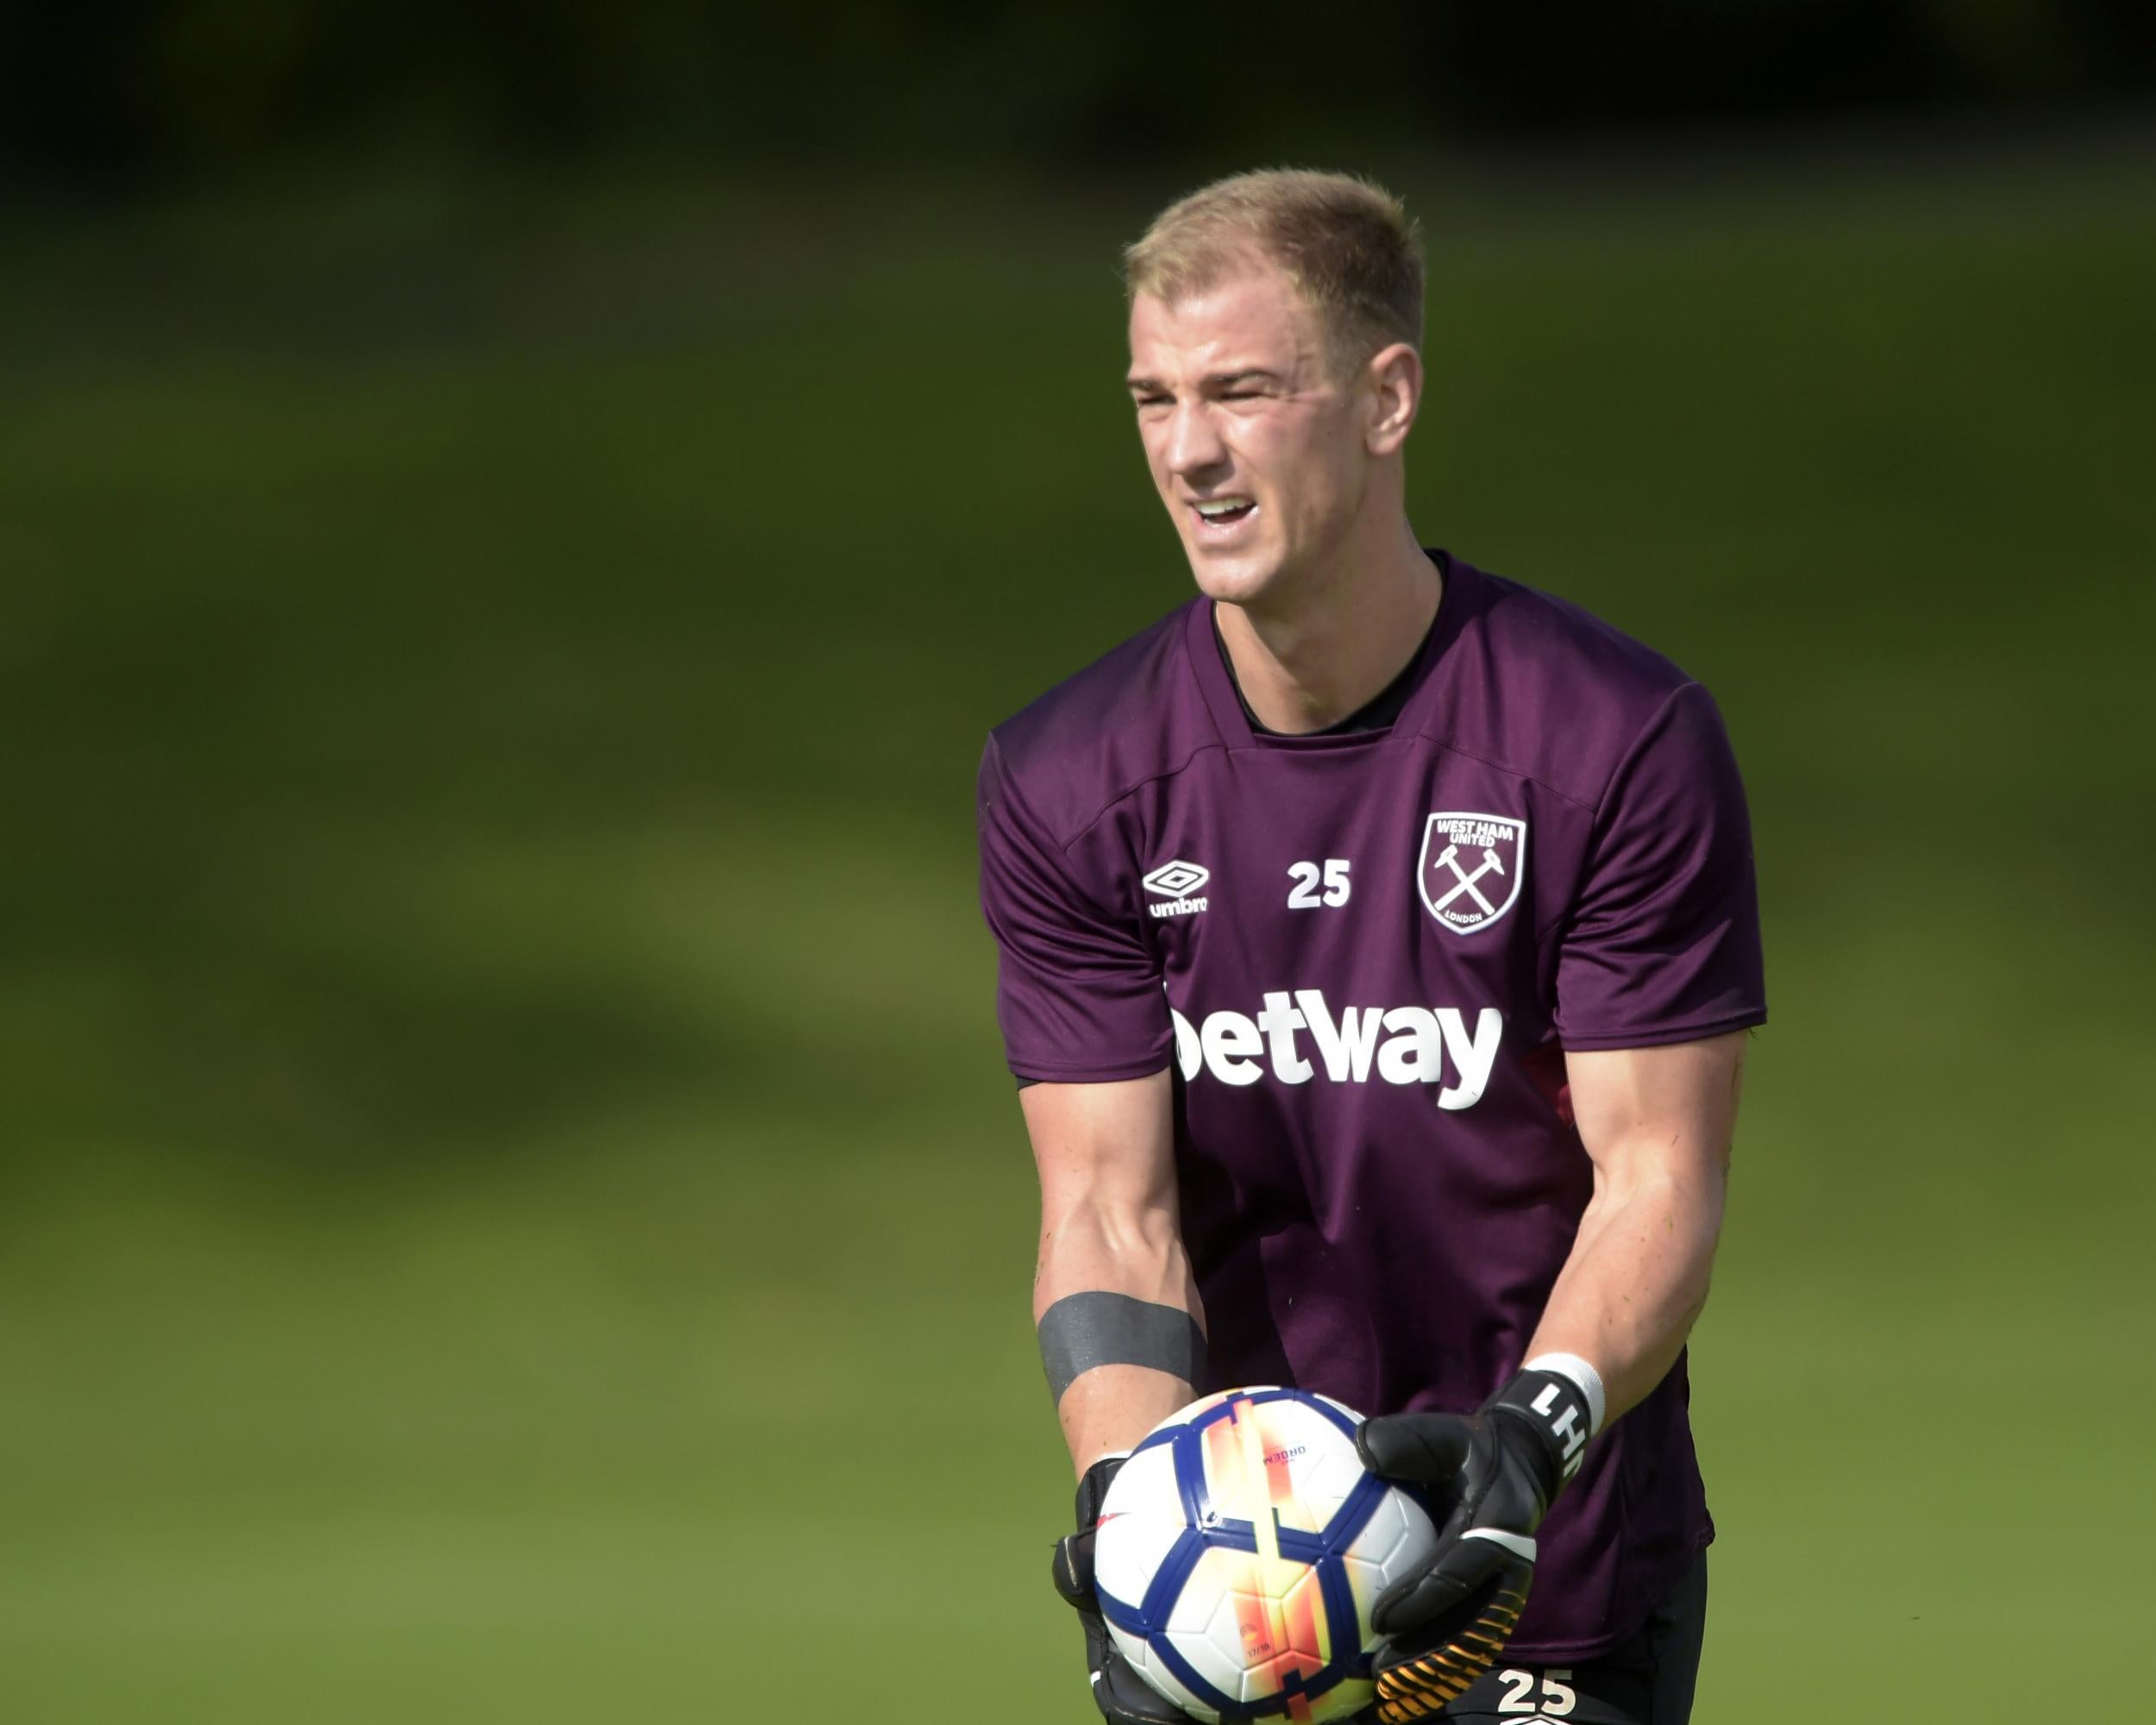 Hart had a tough start to life at West Ham, conceding 10 in his first three games